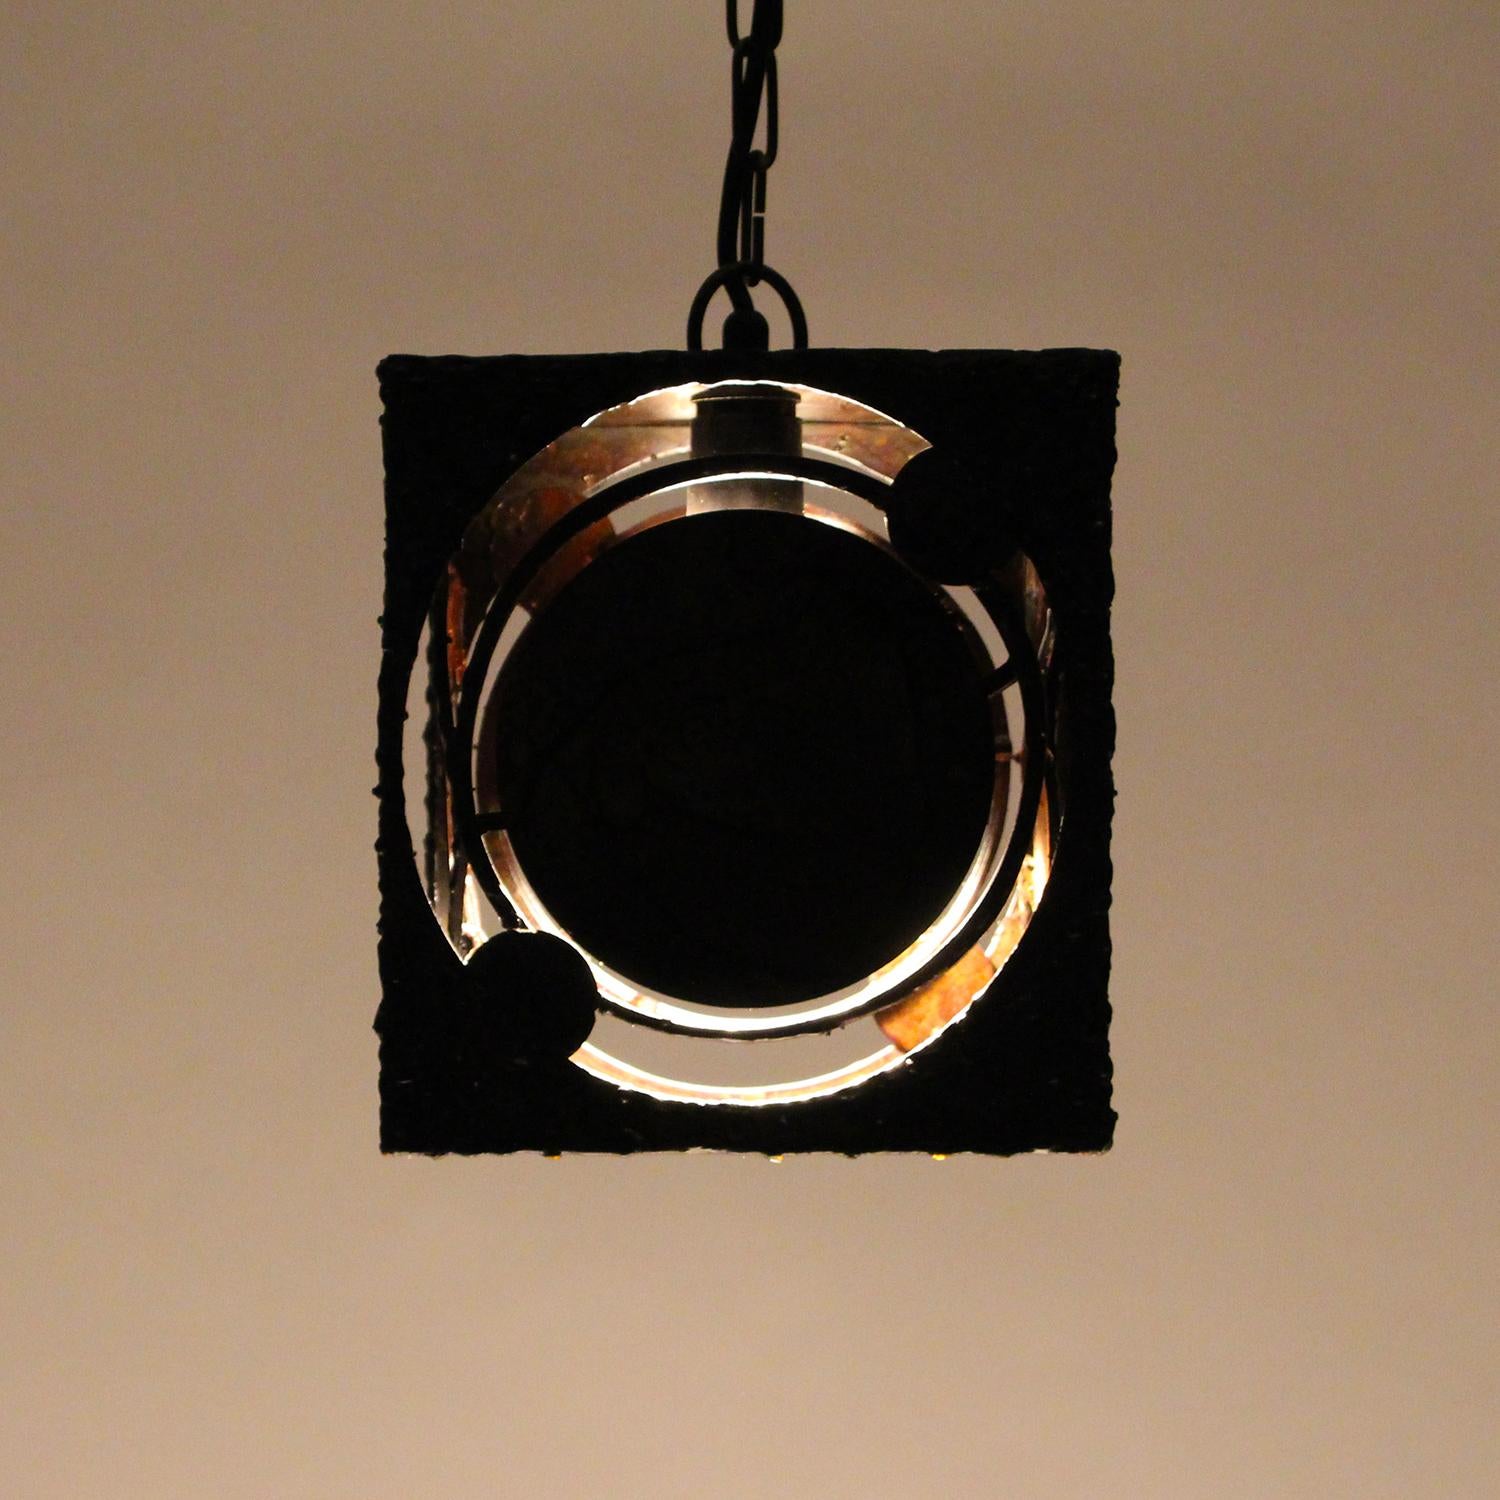 Brutalist Light by Henrik Horst Denmark 1970s - impressive Danish metal hanging lamp in very good vintage condition.

This intriguing square hanging lamp is made up of metal, welded and burned to create a wide spectre of dark brown and metallic